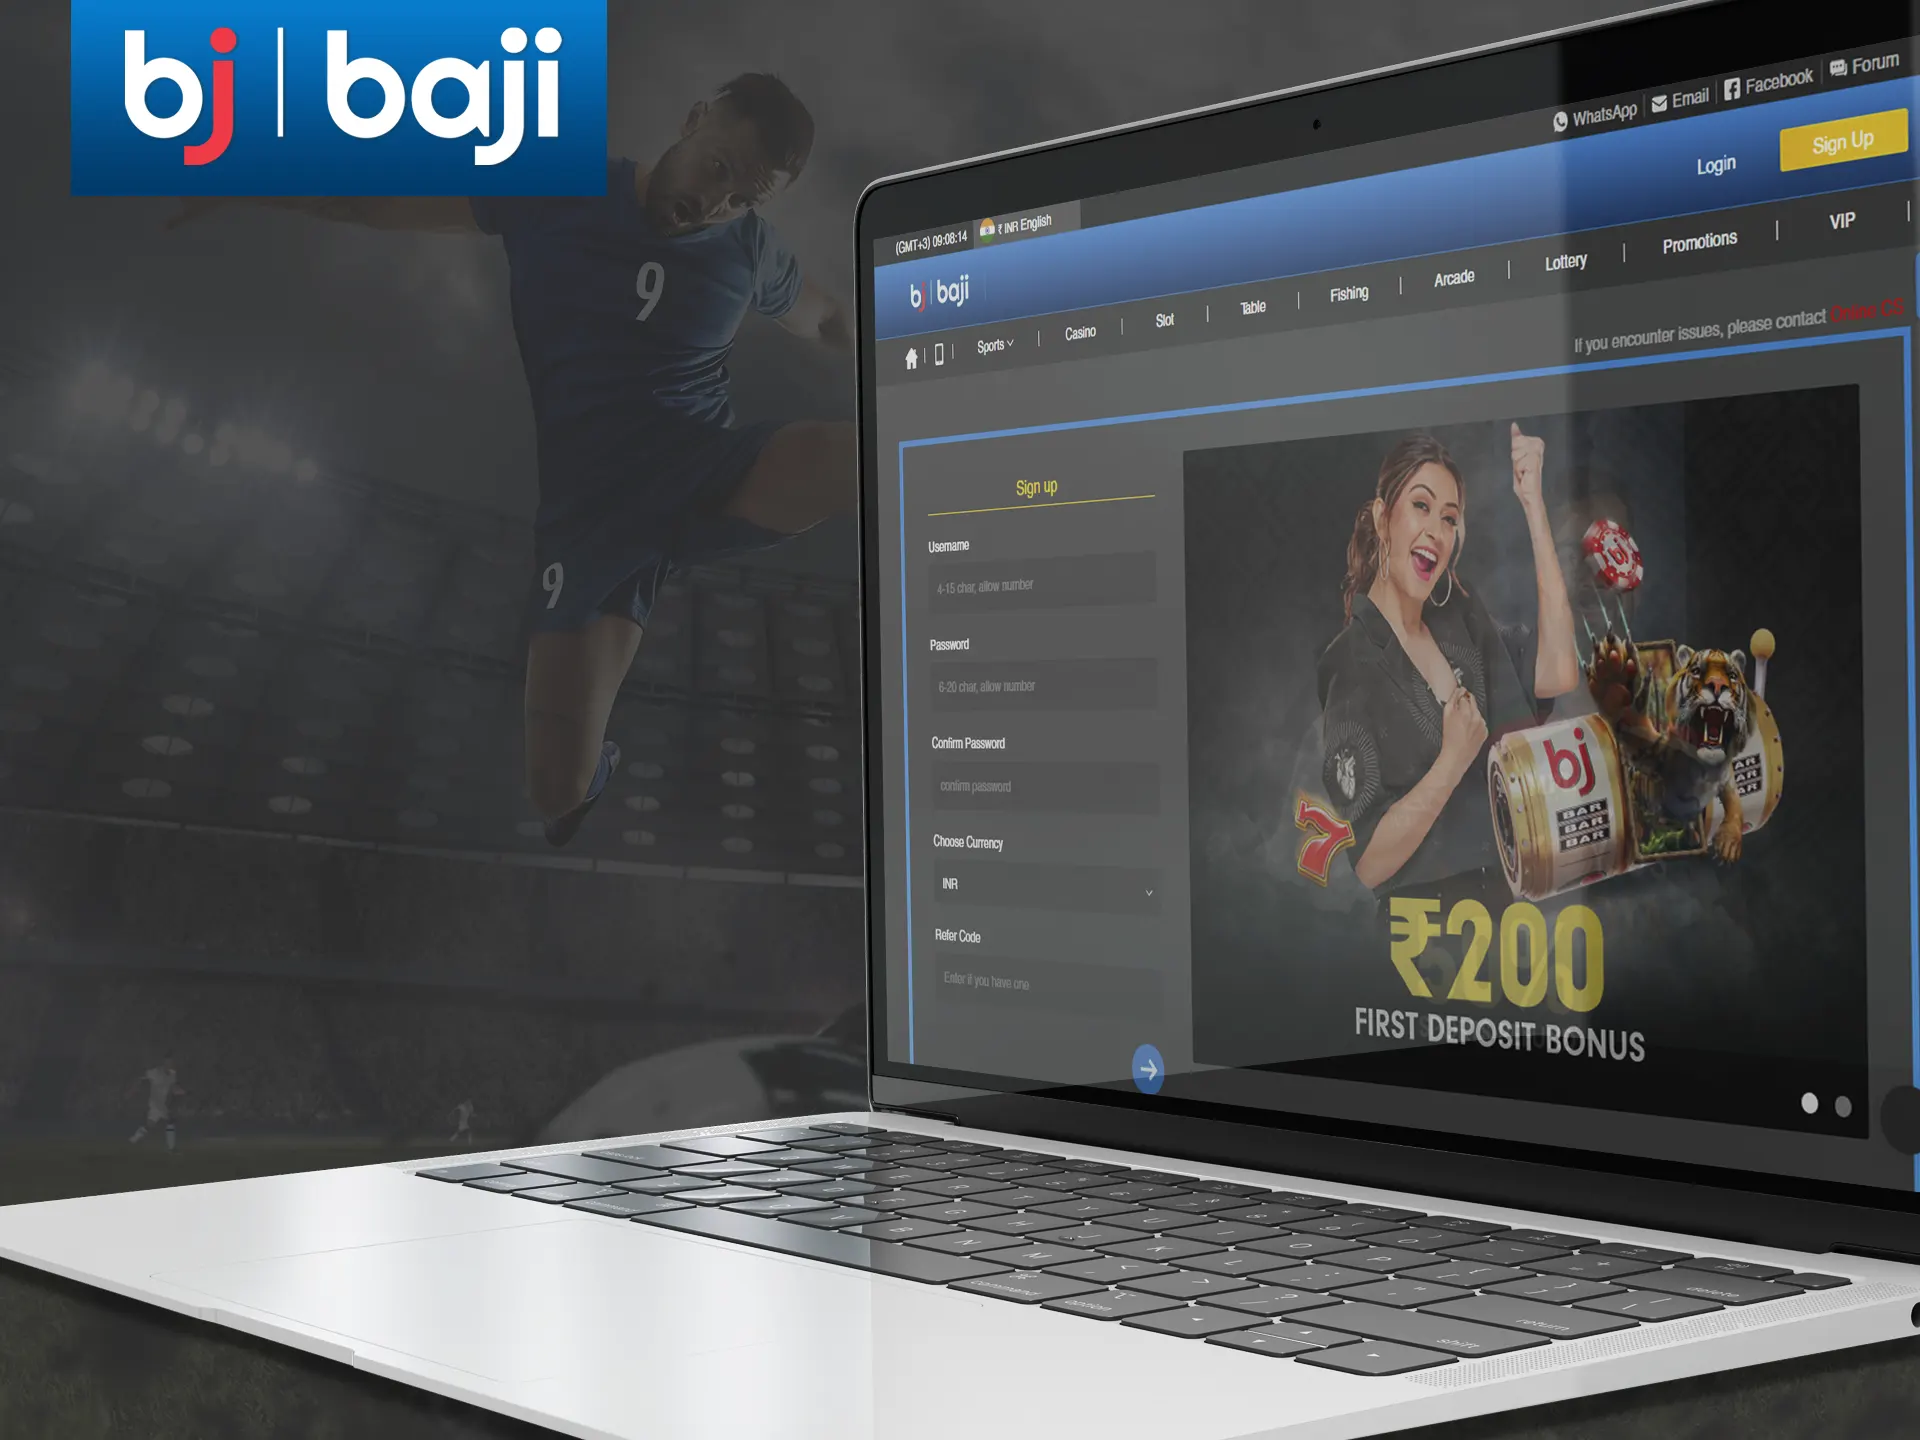 To start betting and gambling on the Baji Live website, you need to create an account.